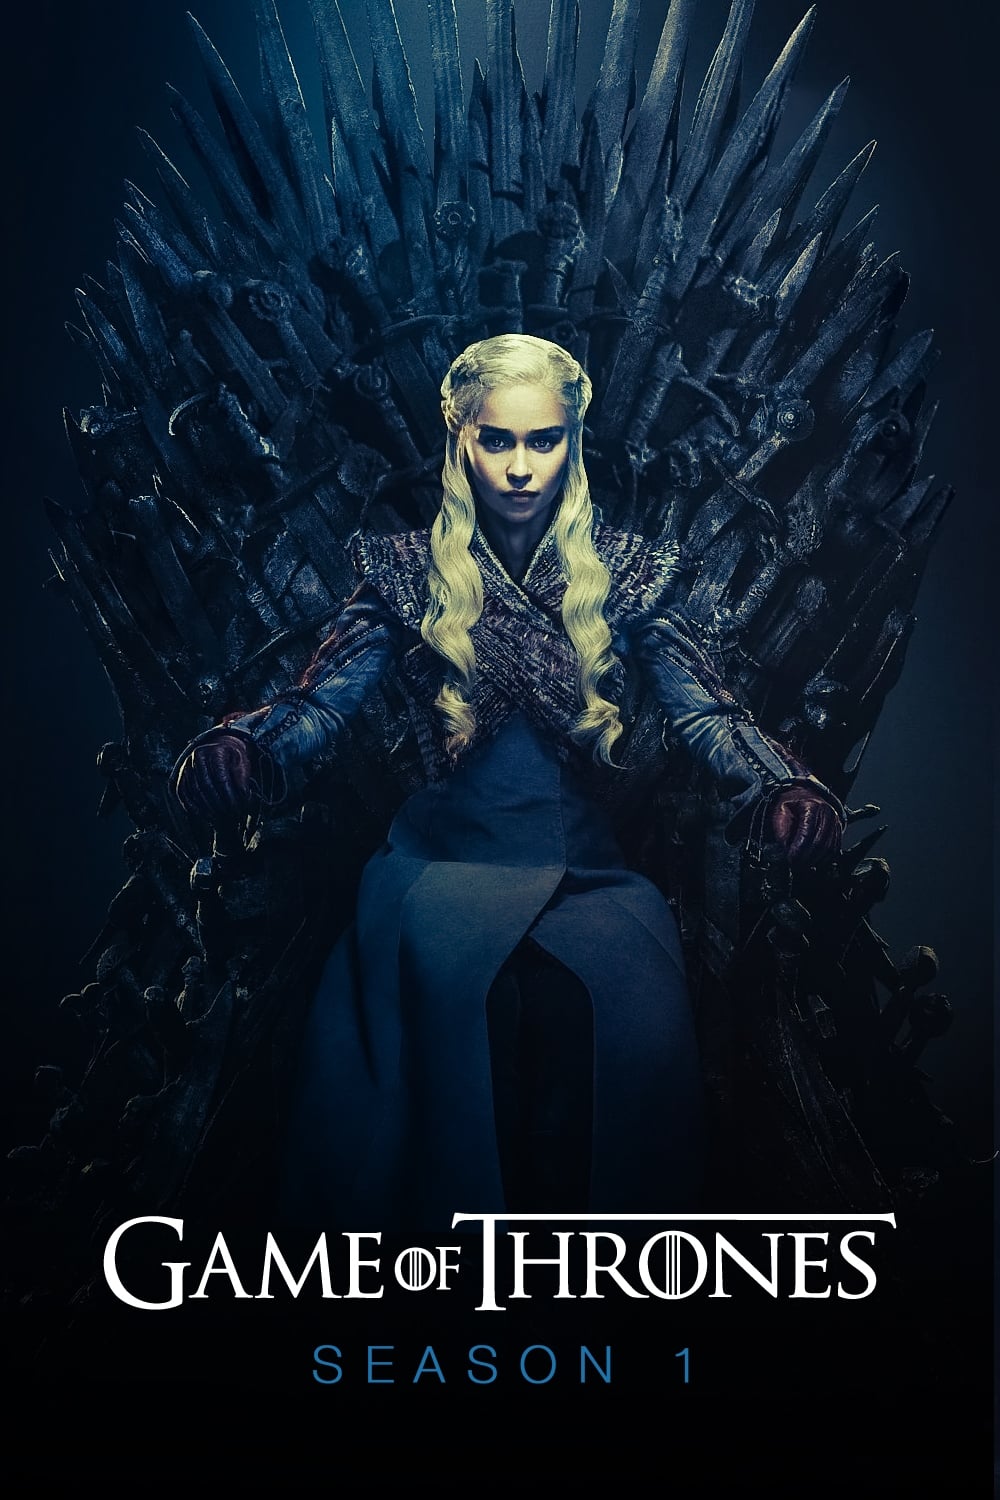 Game Of Thrones (2011) HBO Series S01 Complete Dual Audio Hindi-English WebDL 480p 720p 1080p 2160p